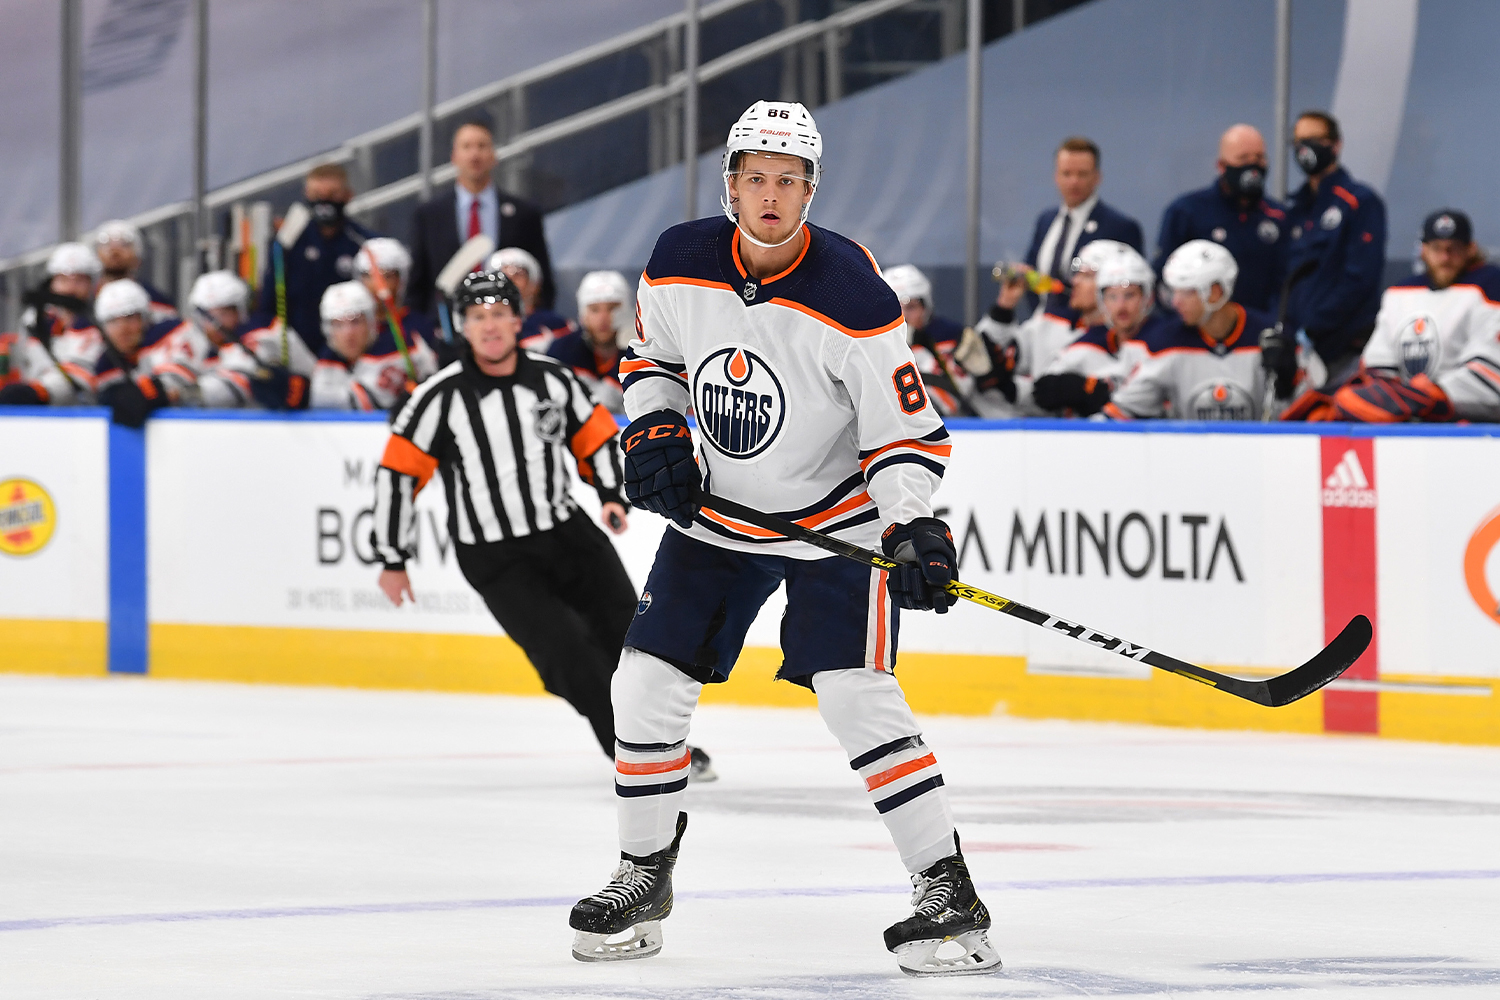 Philip Broberg #86 of the Edmonton Oilers mans the point during first period of an exhibition game against the Calgary Flames prior to the 2020 NHL Stanley Cup Playoffs at Rogers Place on July 28, 2020